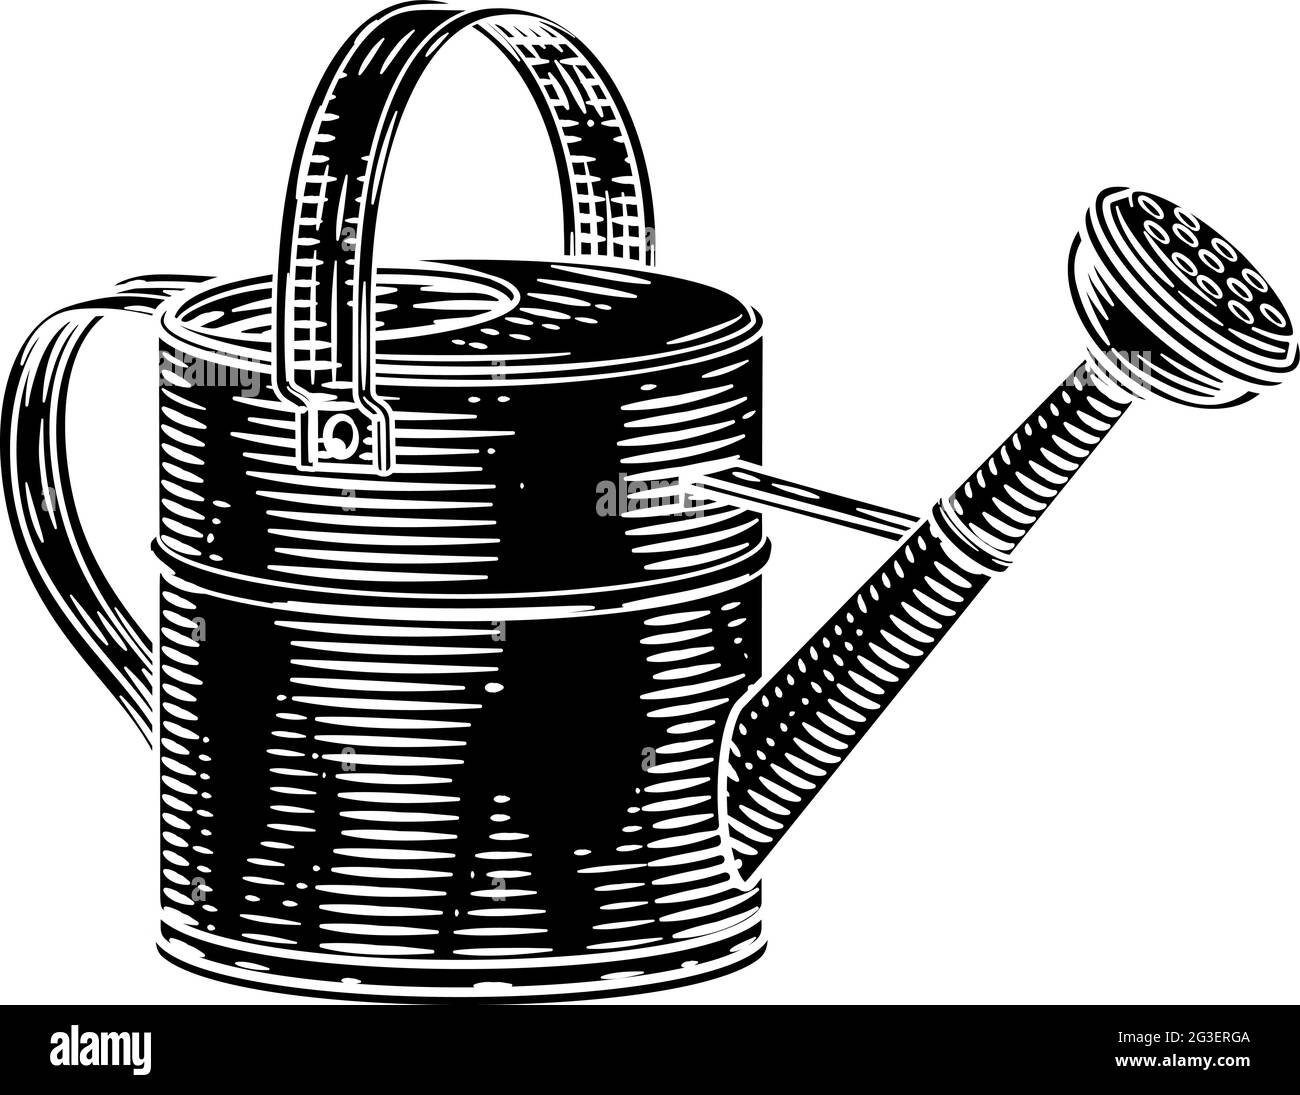 Garden Tool Watering Can Woodcut Vintage Style Stock Vector